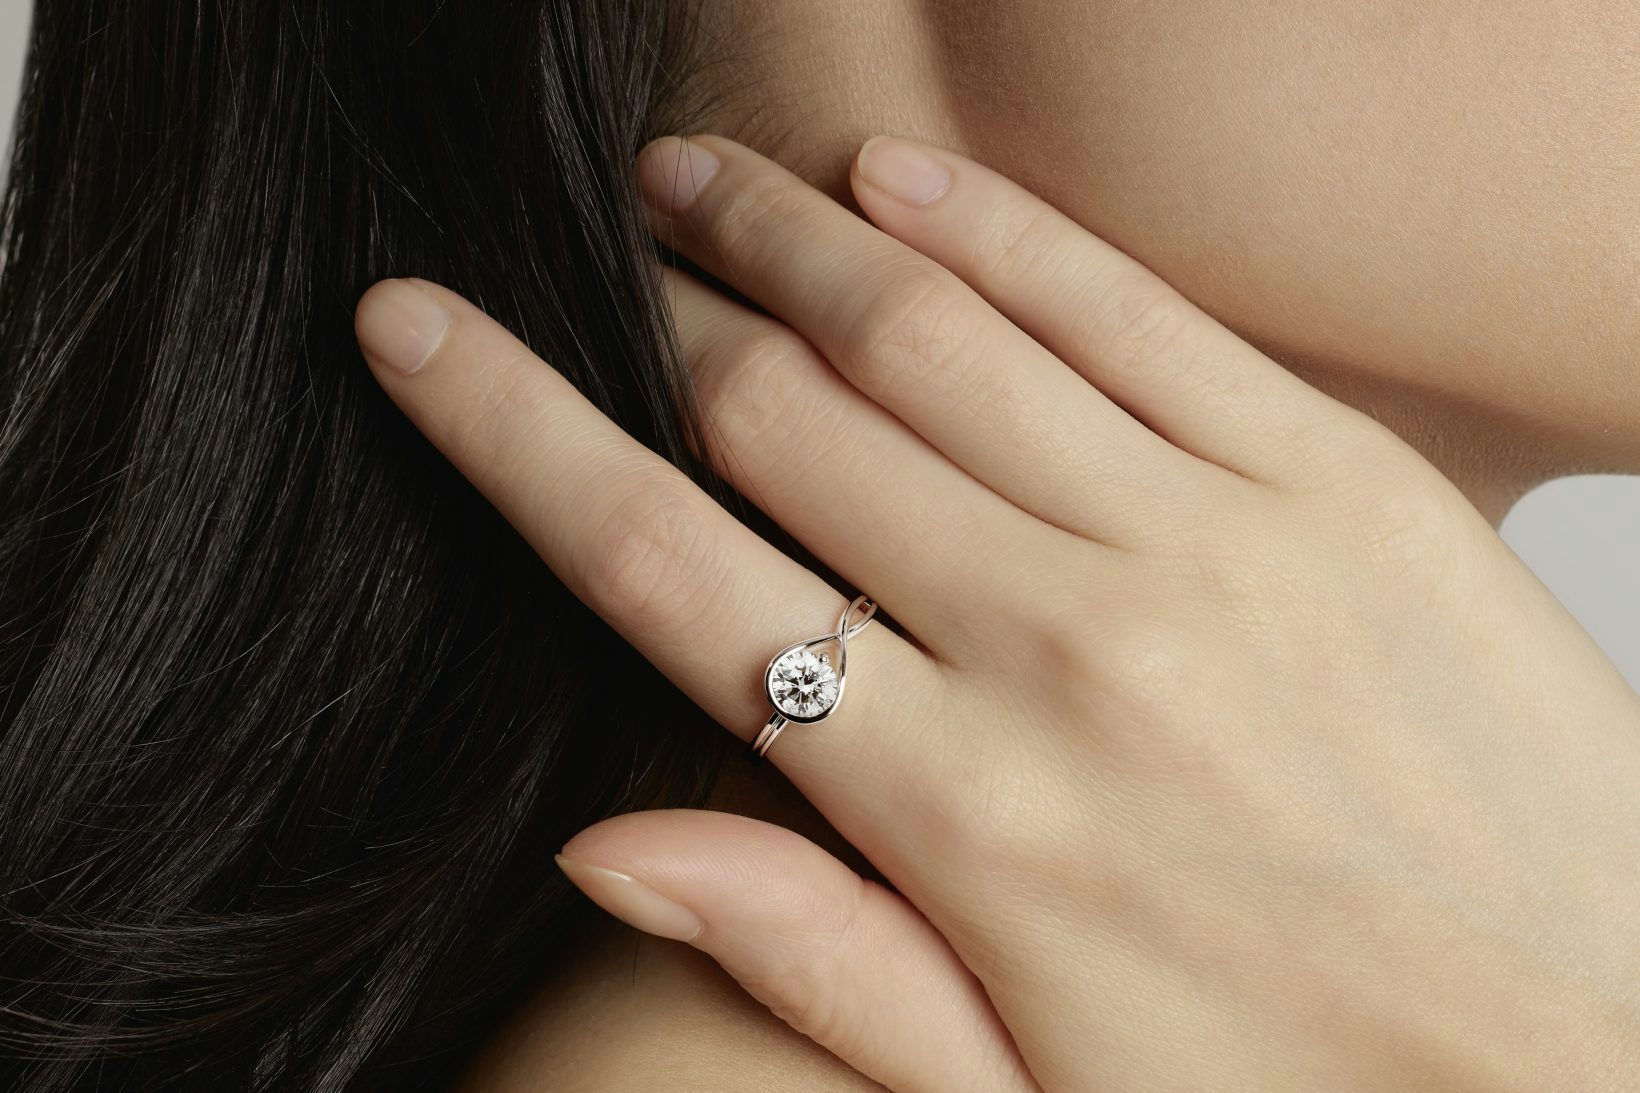 Pandora, the world’s largest jewellery brand, invests in lab-grown diamonds